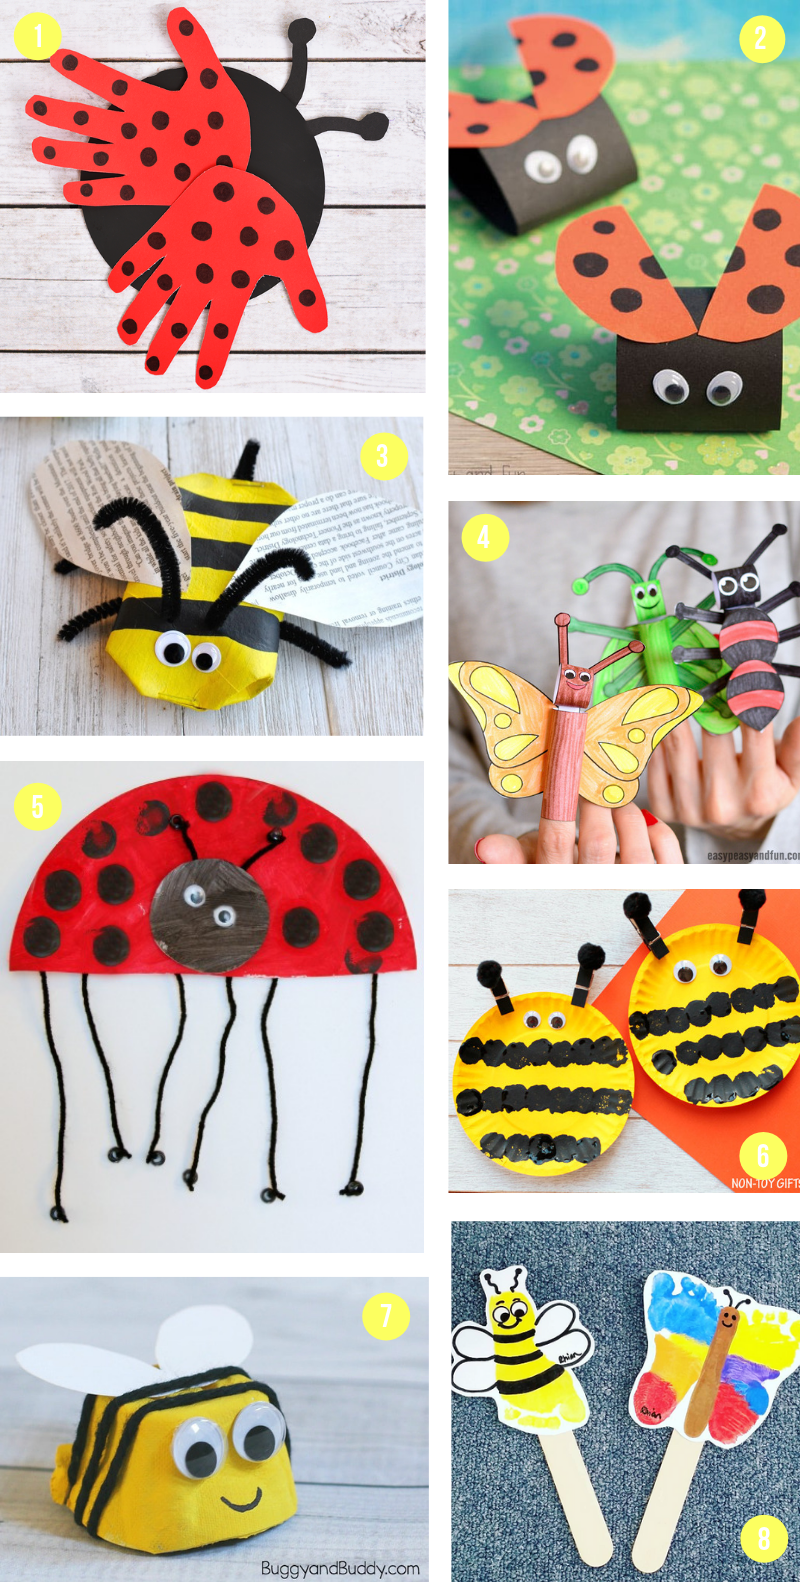 The Epic Collection Of Spring Crafts For Kids - All The Best Art Projects & Activities To Celebrate The Season -   16 diy projects For Mom kids ideas